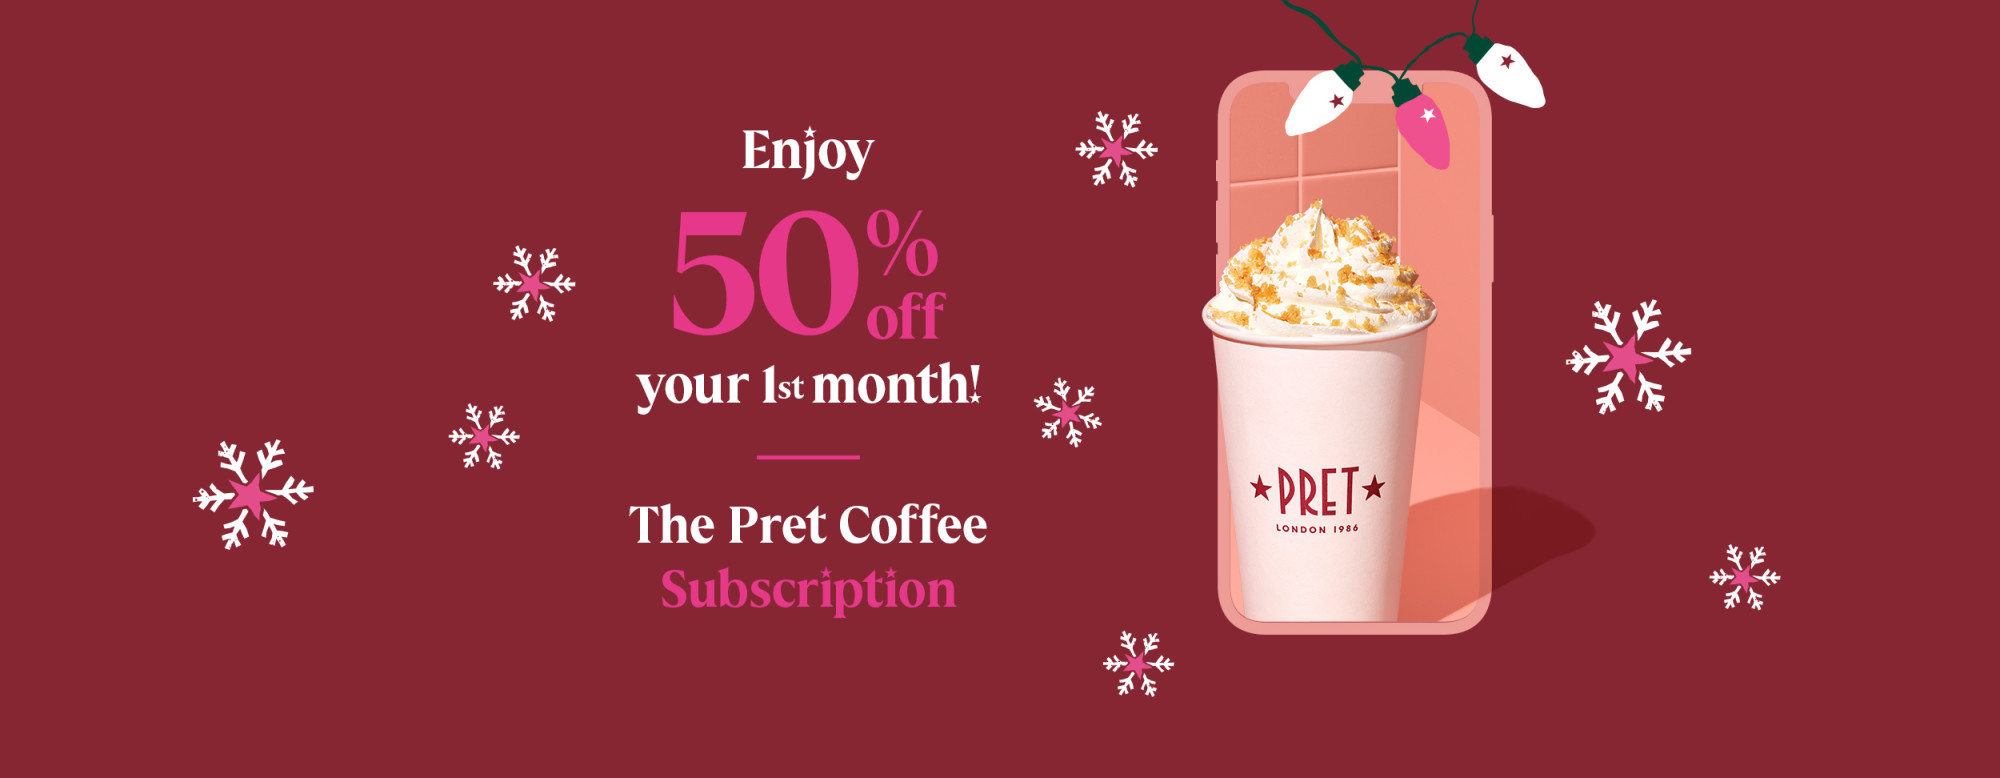 Enjoy 50% off your first month!